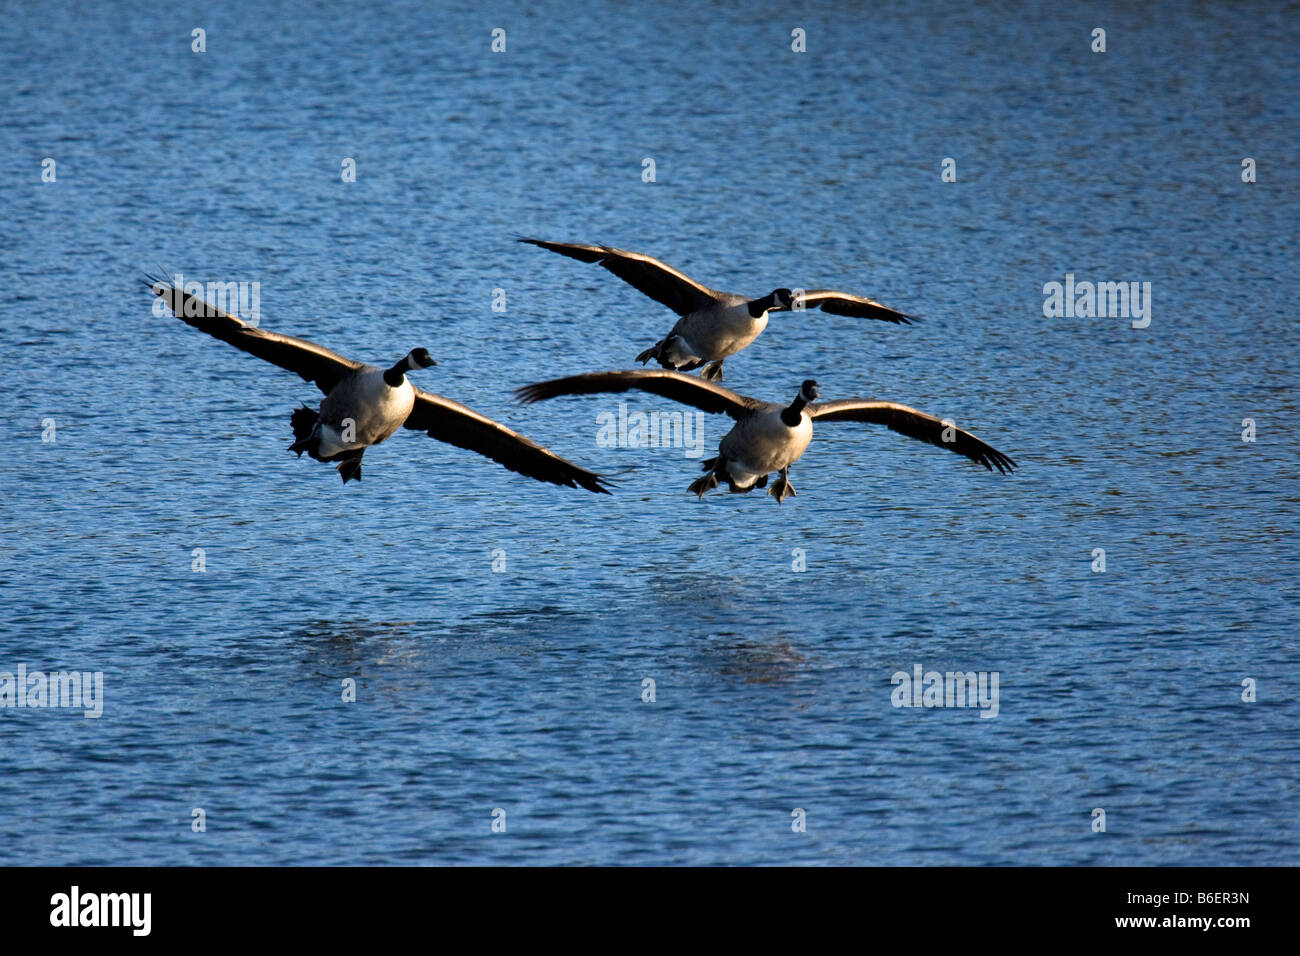 Arrival of Canadian Geese (Branta canadensis) Stock Photo